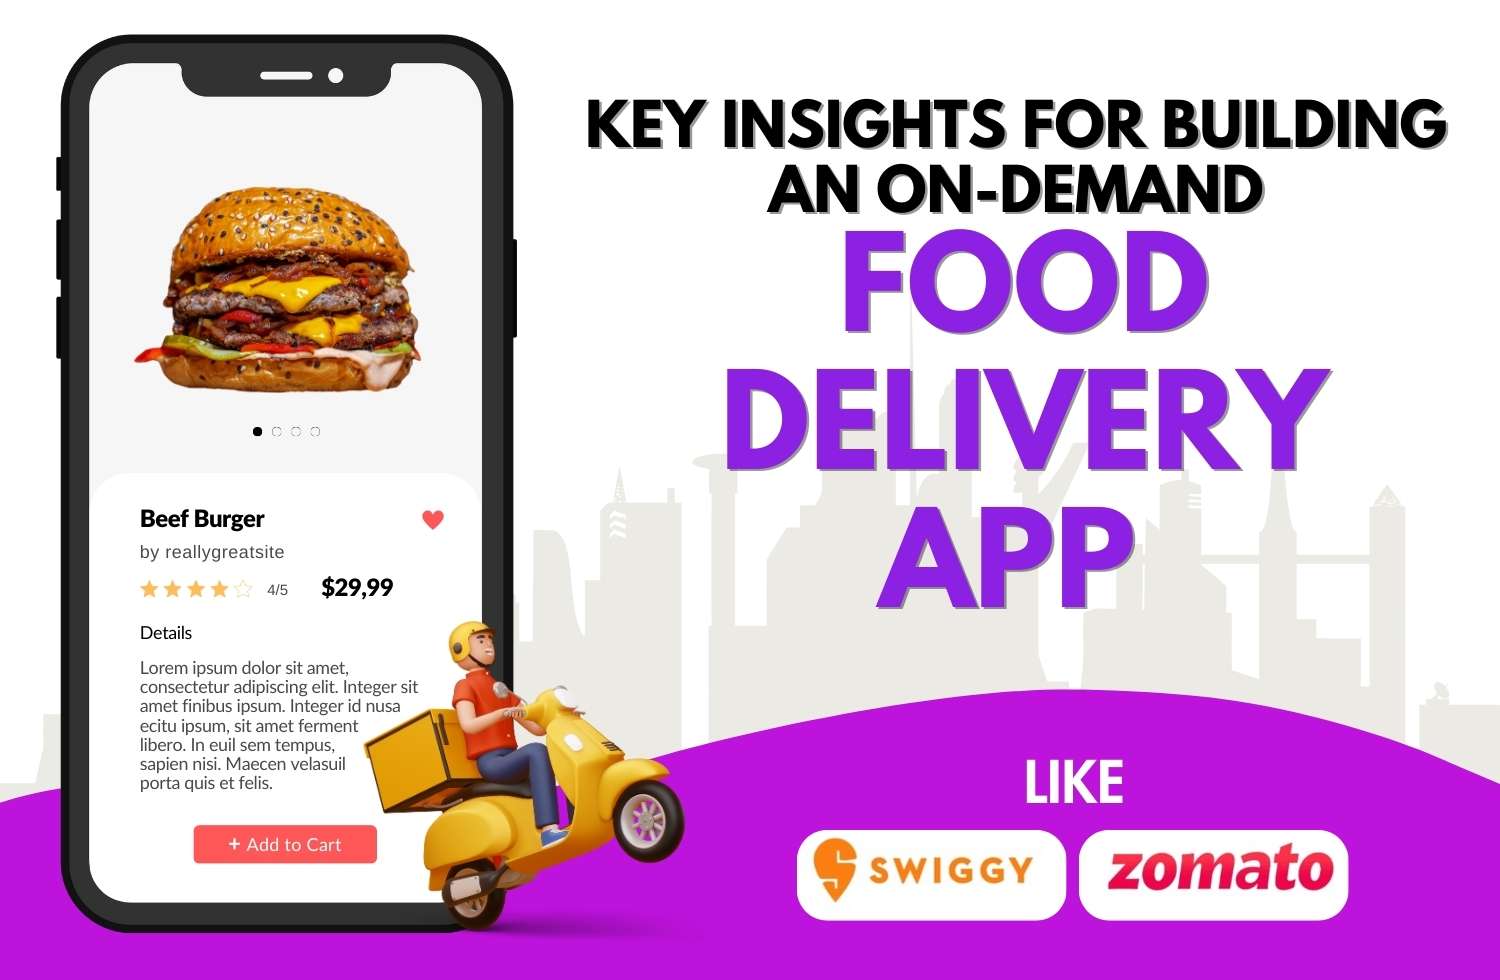 Key Insights for Building an On-Demand Food Delivery